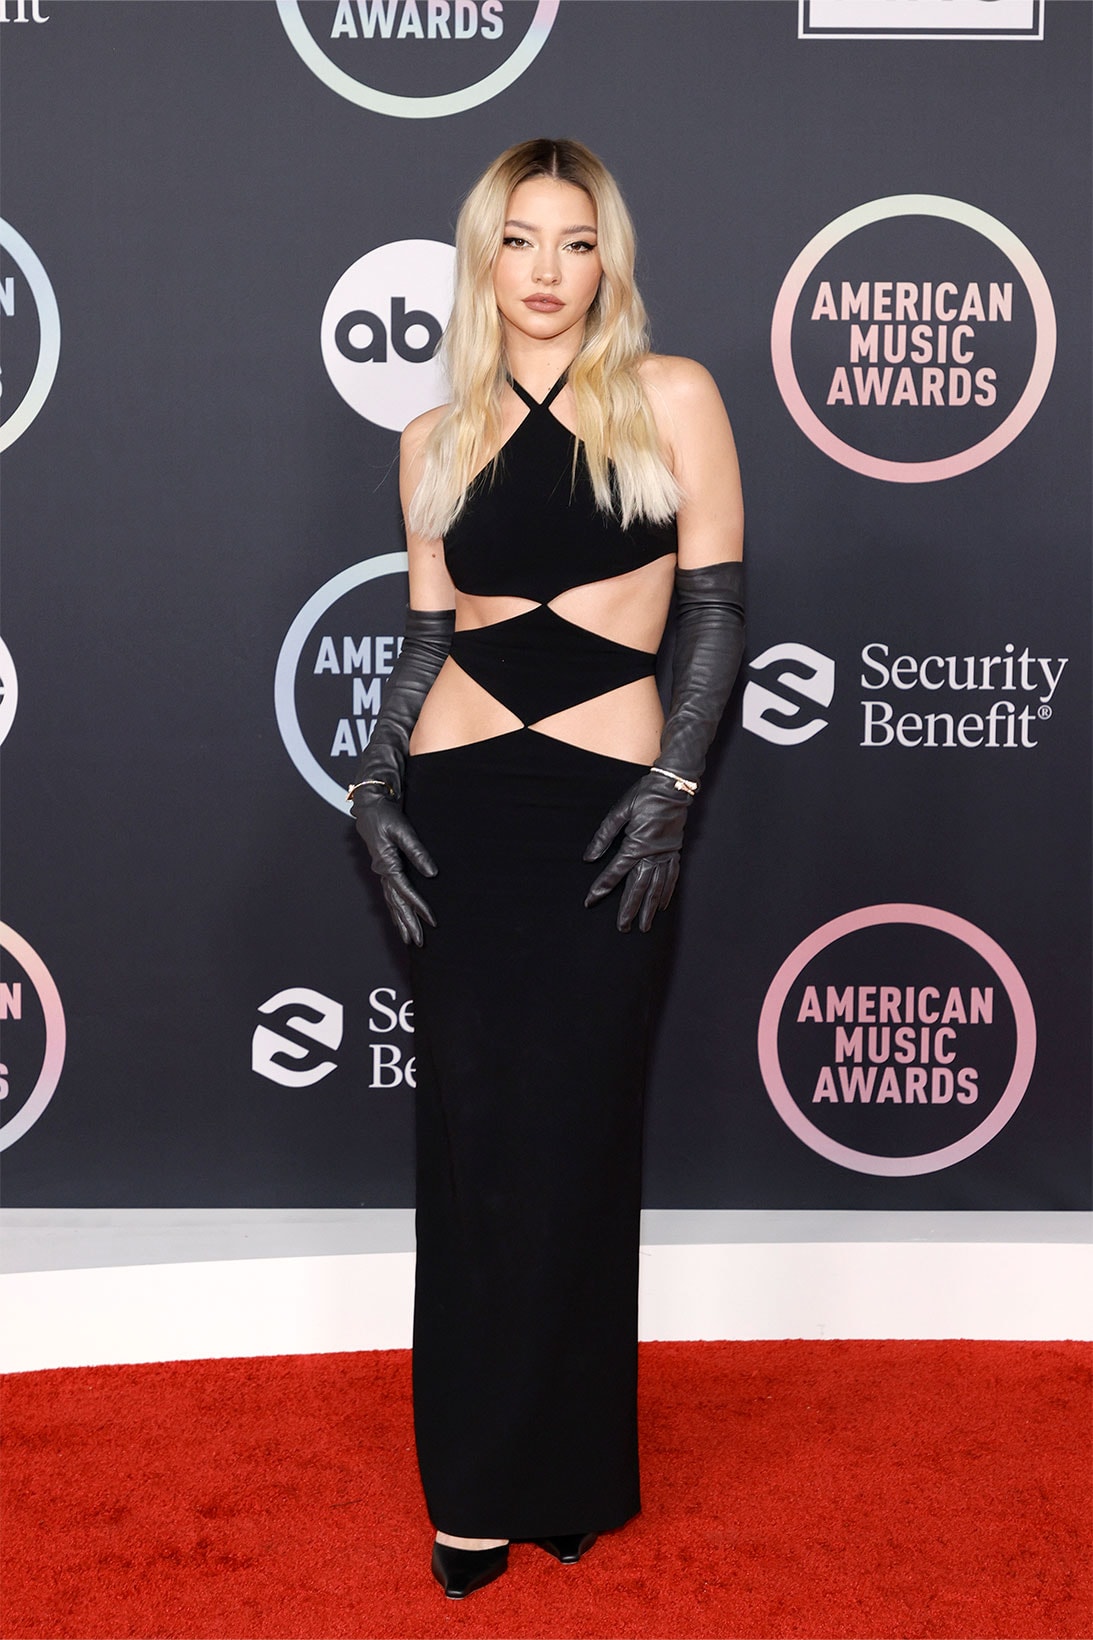 2021 American Music Awards AMAs Red Carpet Best Celebrity Looks Madelyn Cline